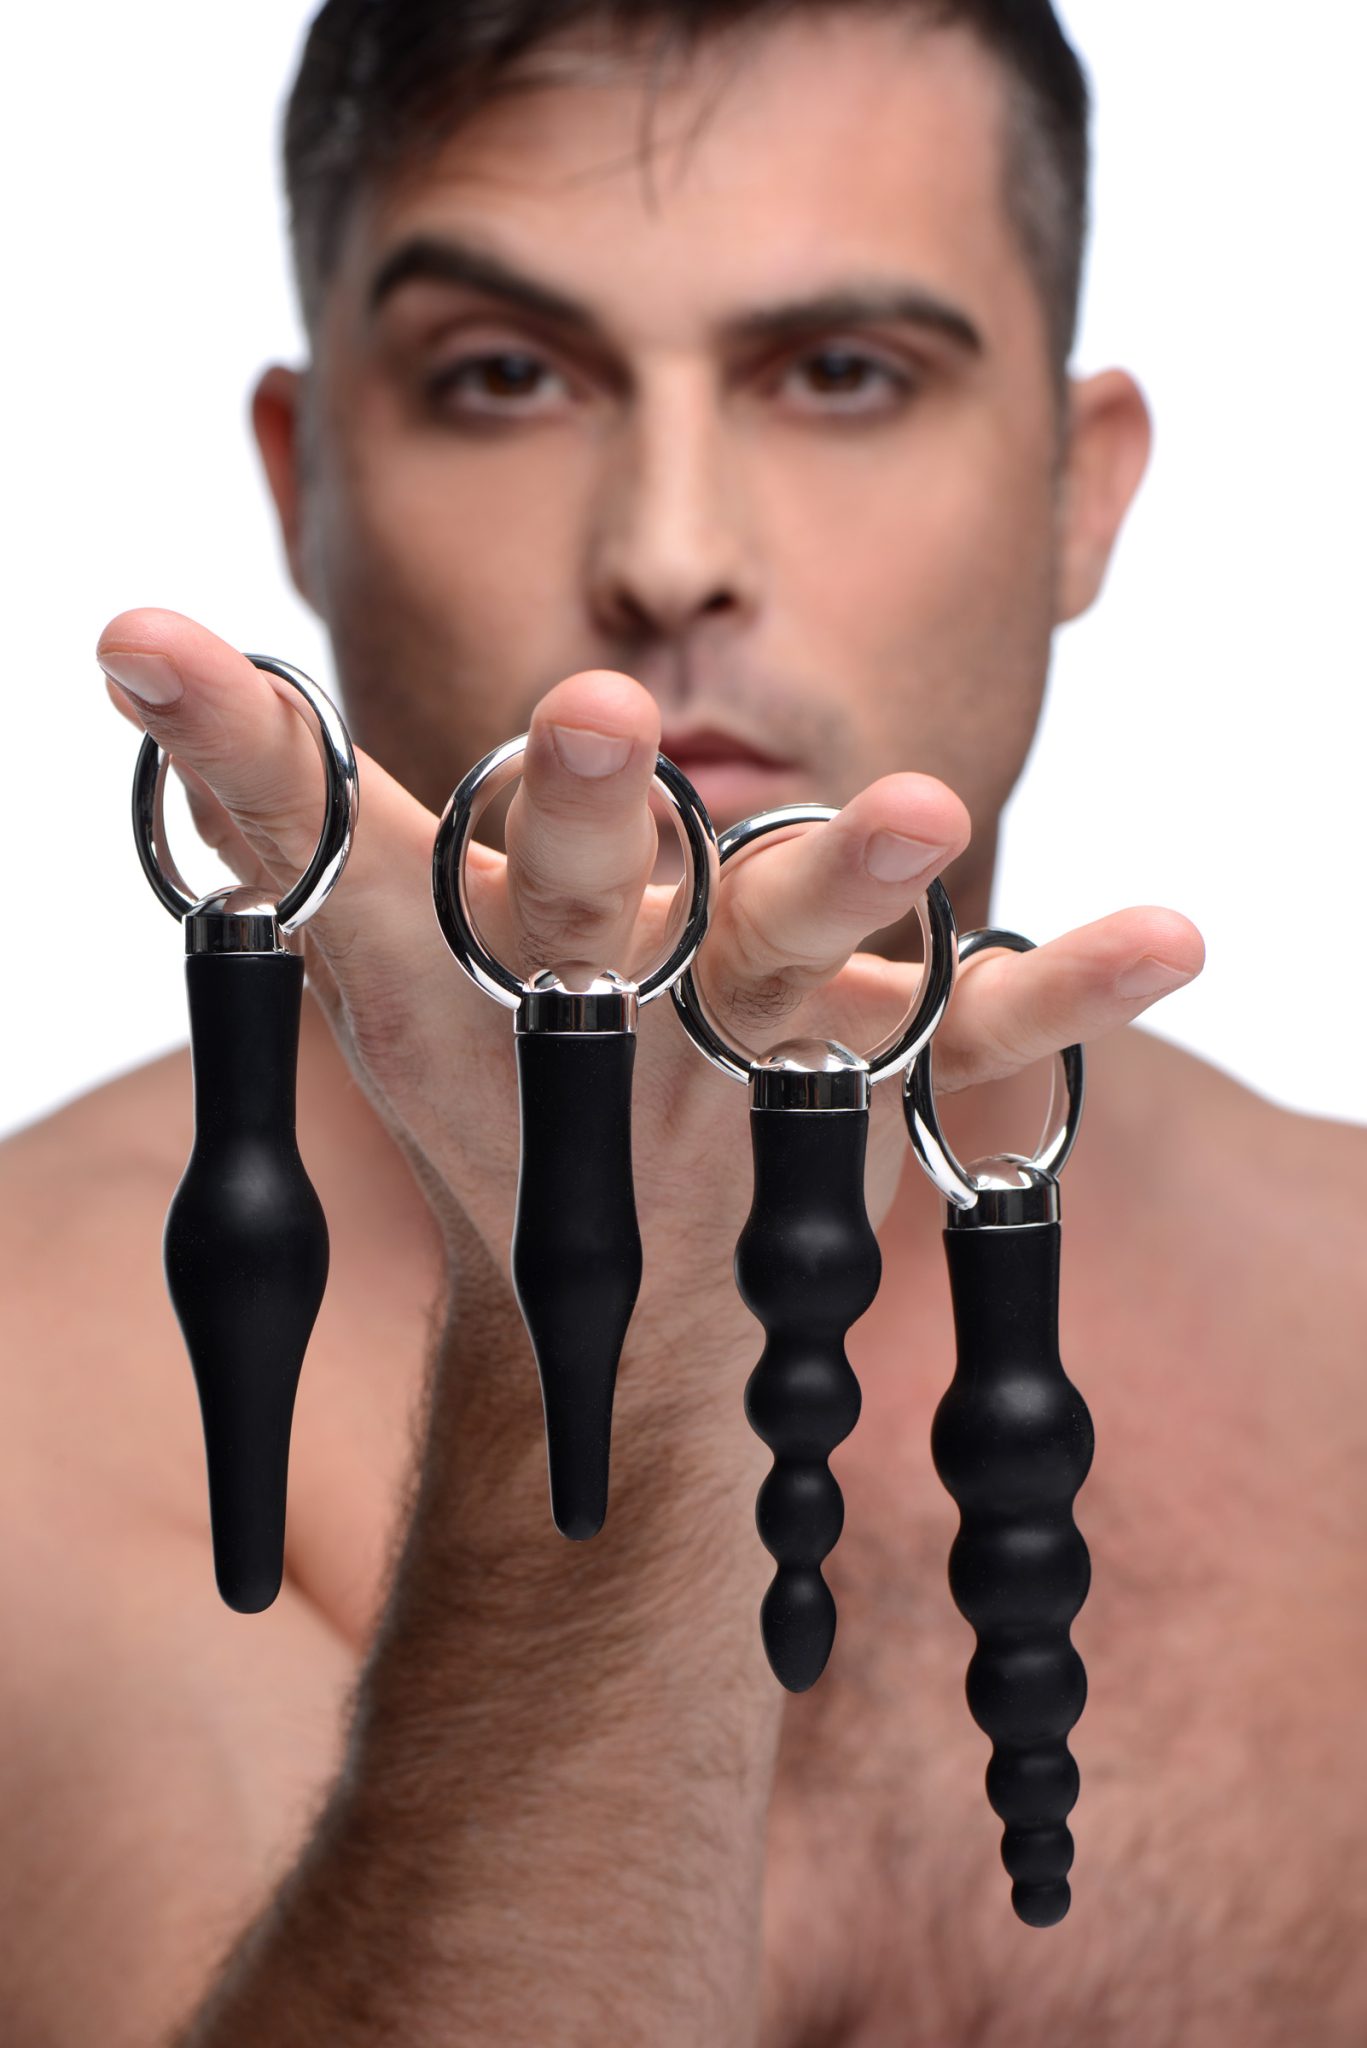 Master Series 4 Piece Silicone Anal Ringed Rimmer Set